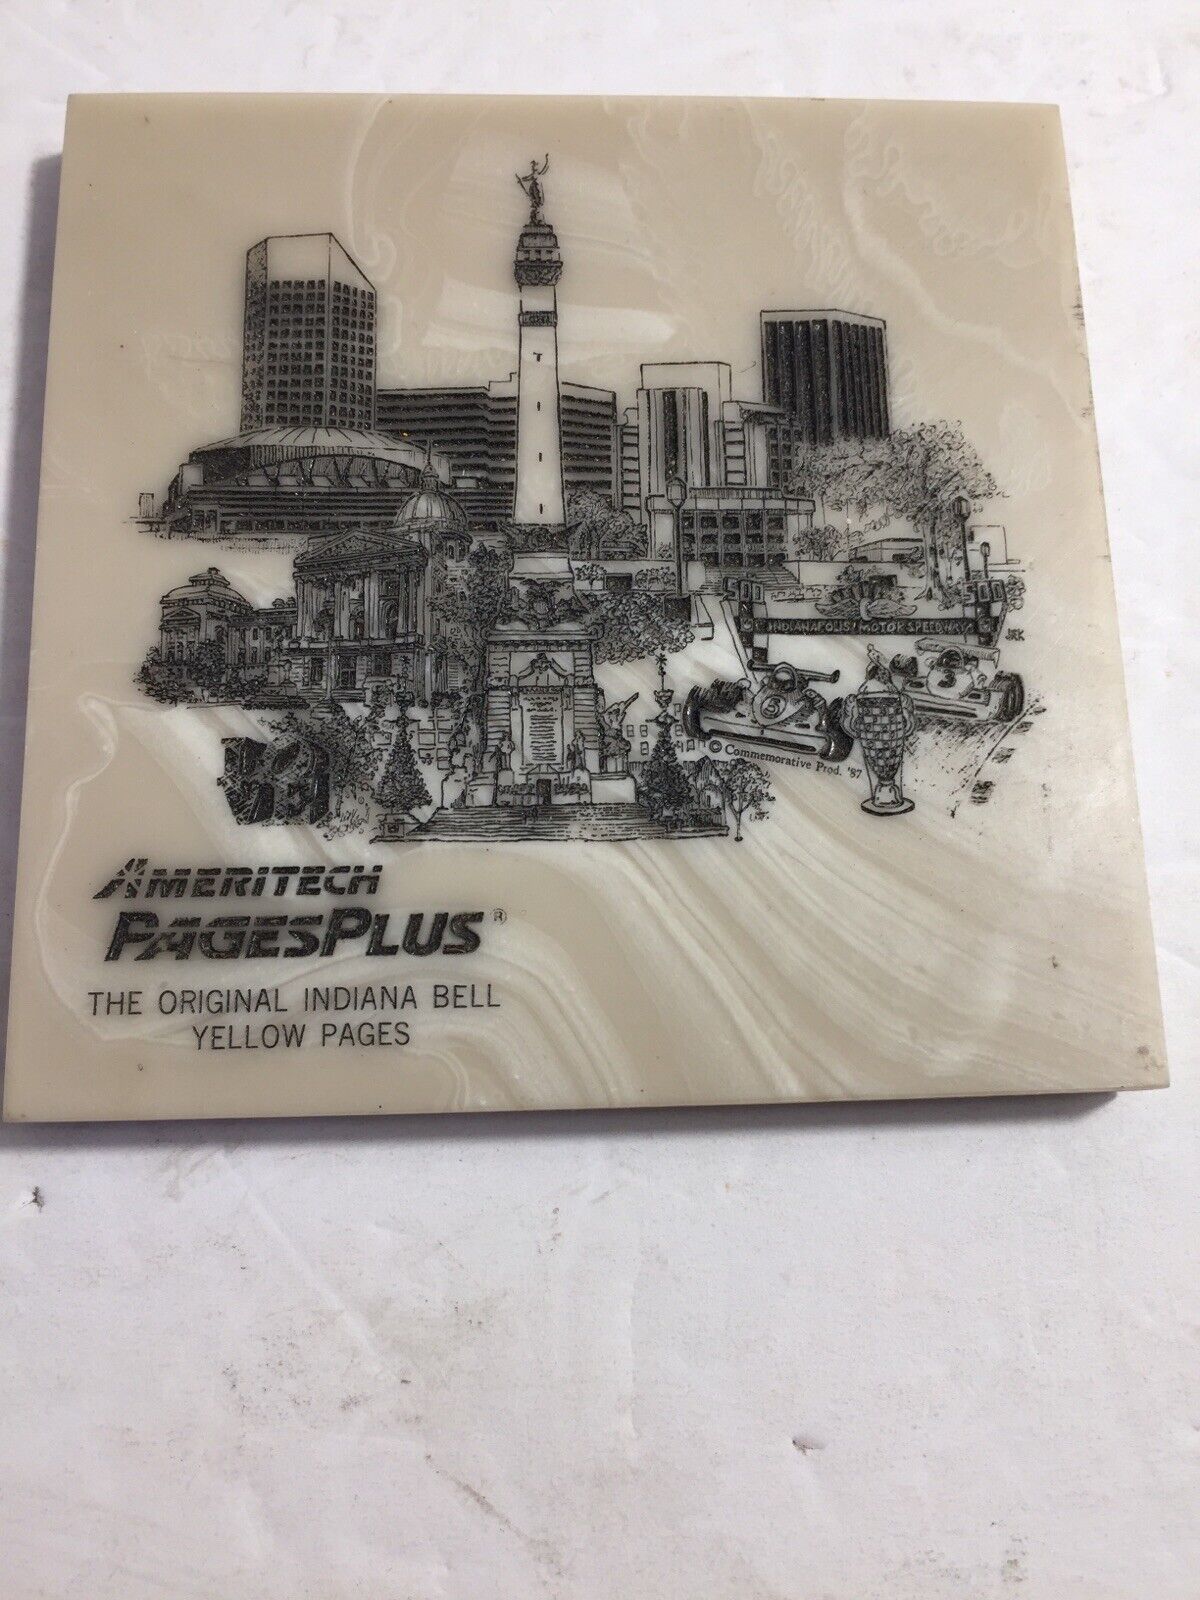 Vintage AMERITECH PAGES PLUS Indiana Bell Yellow Pages Coaster